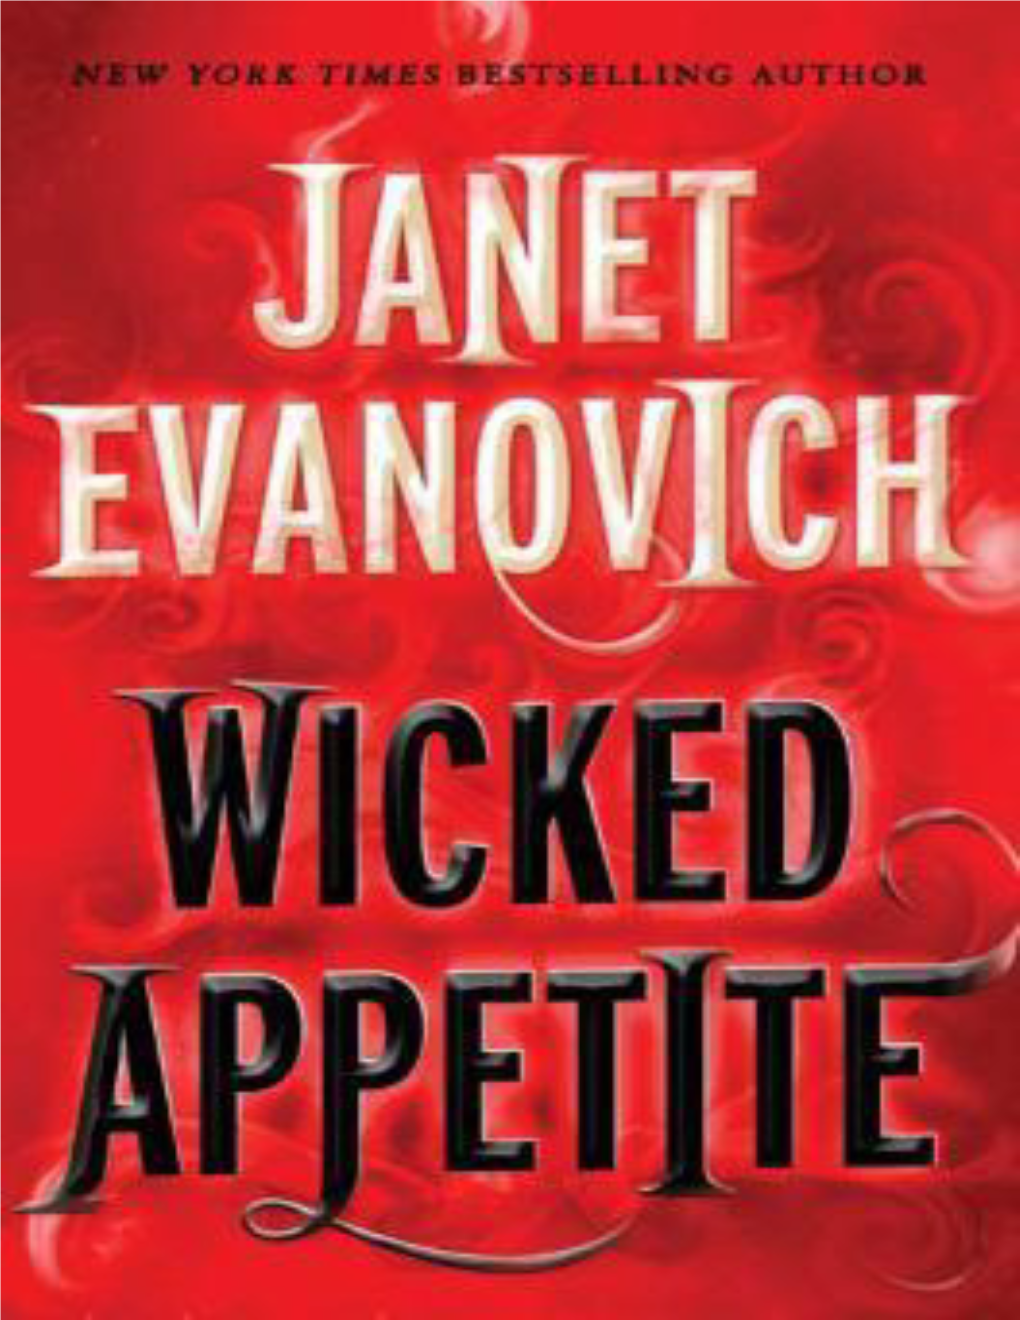 WICKED APPETITE Also by Janet Evanovich